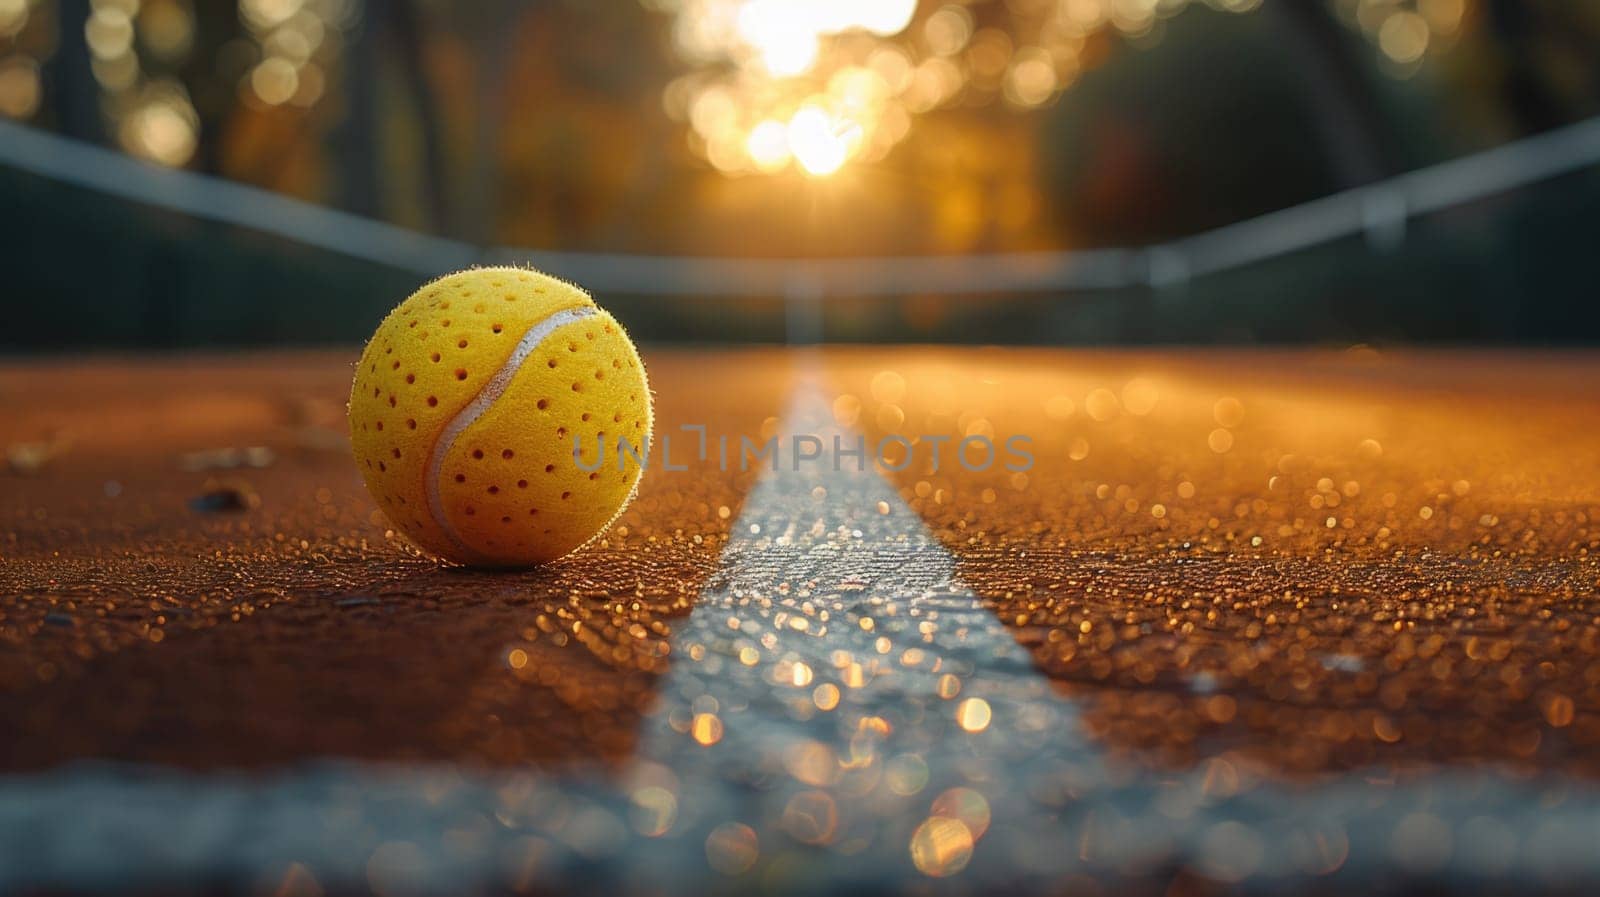 A vibrant yellow tennis ball is left untouched on the green tennis court surface, awaiting the next serve or match to begin.